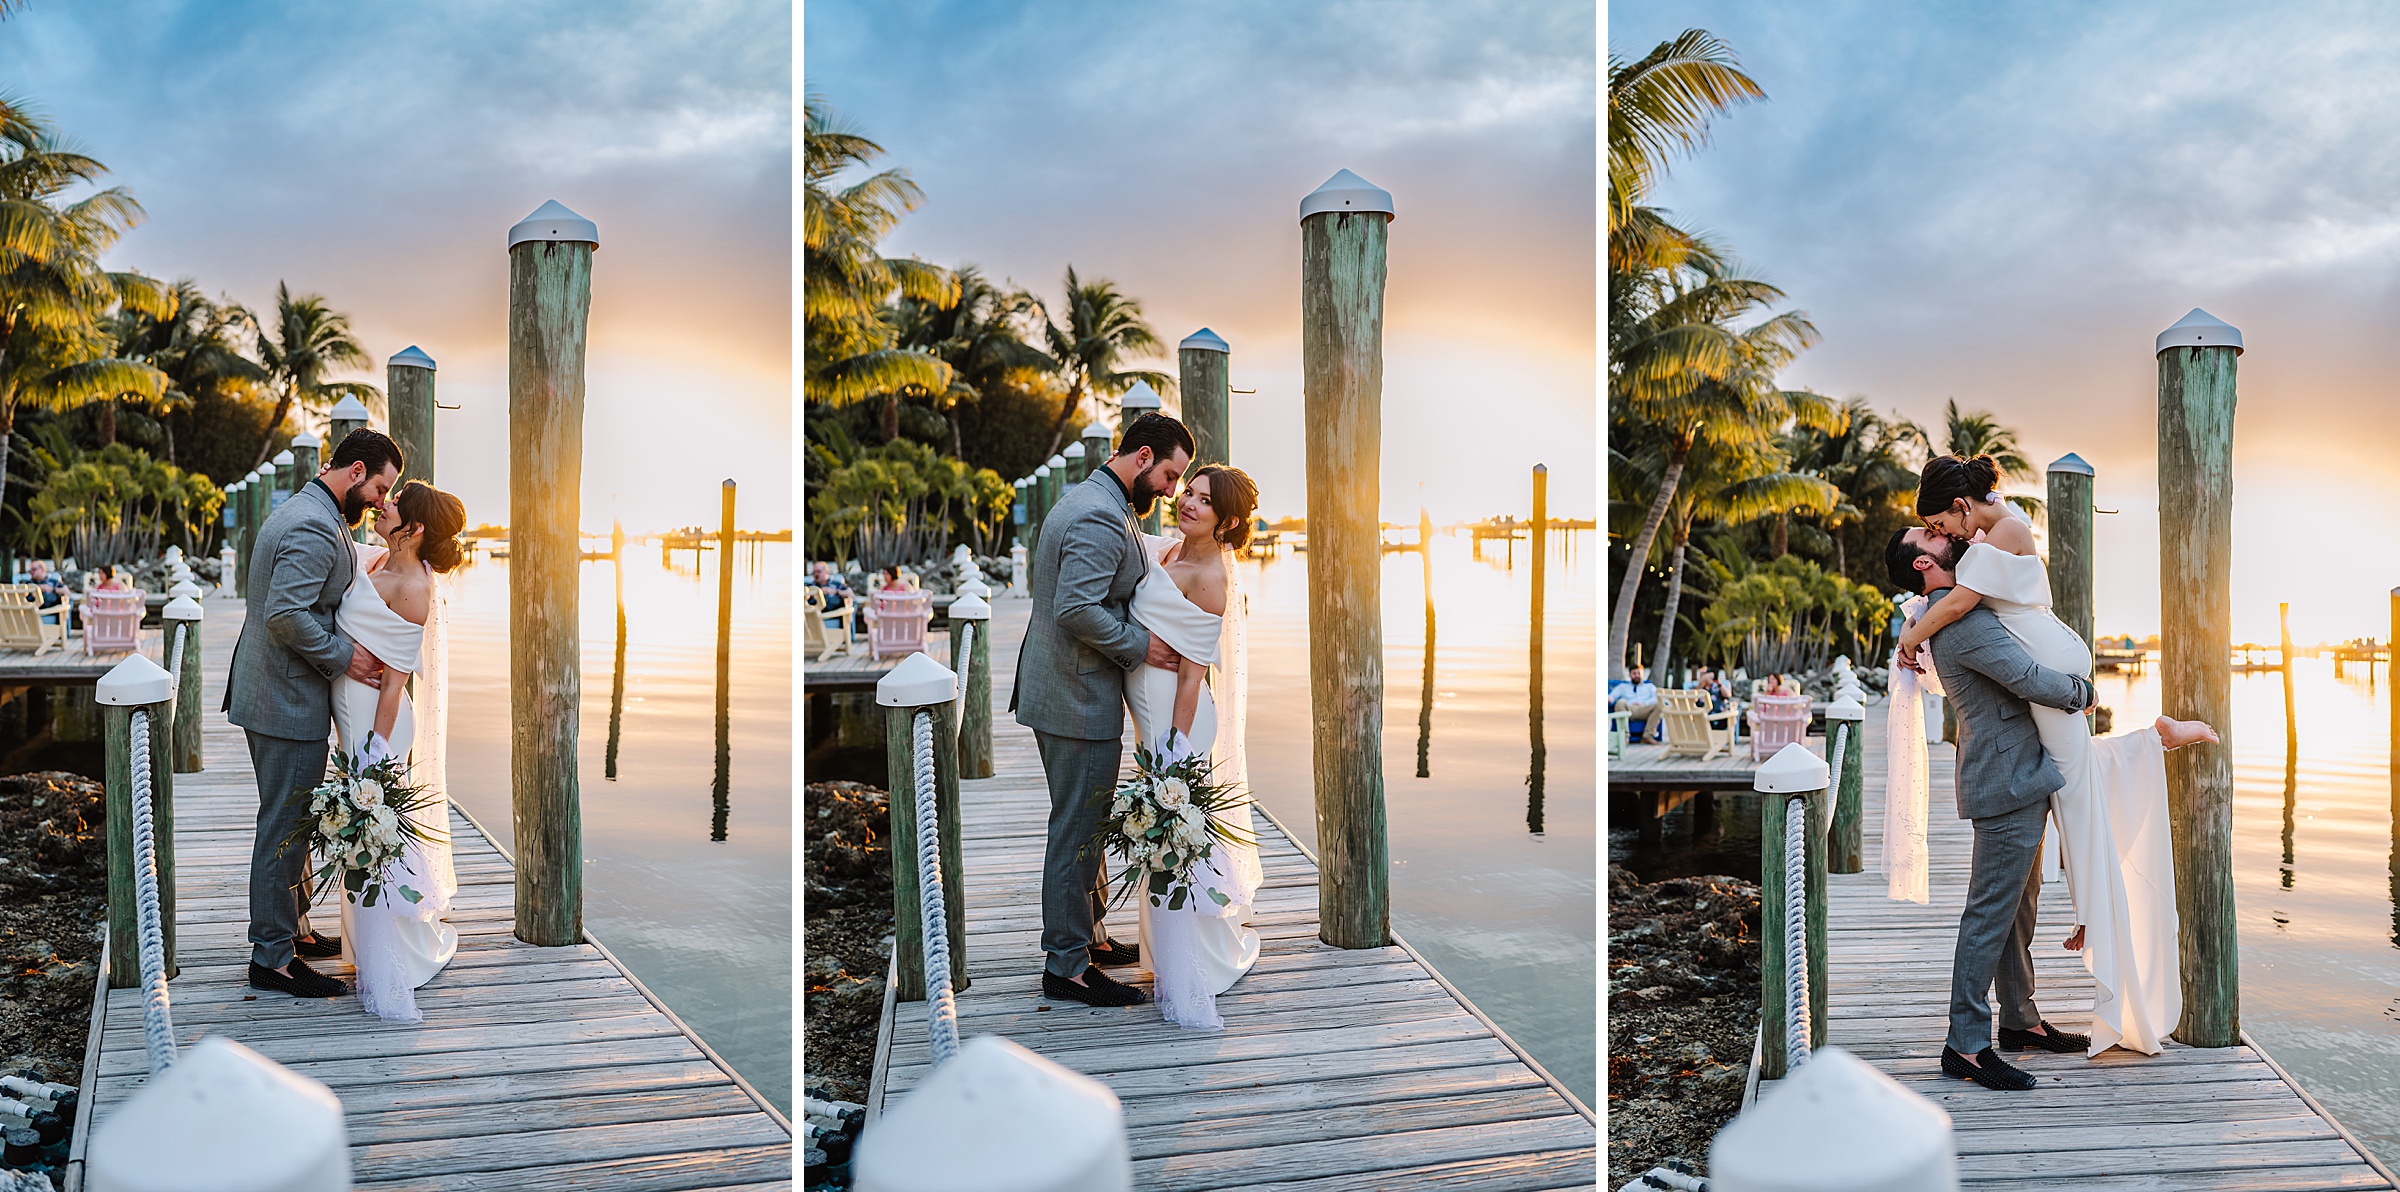 Newlyweds share a kiss on a Dream Bay Resort dock overlooking the Florida Keys waters.